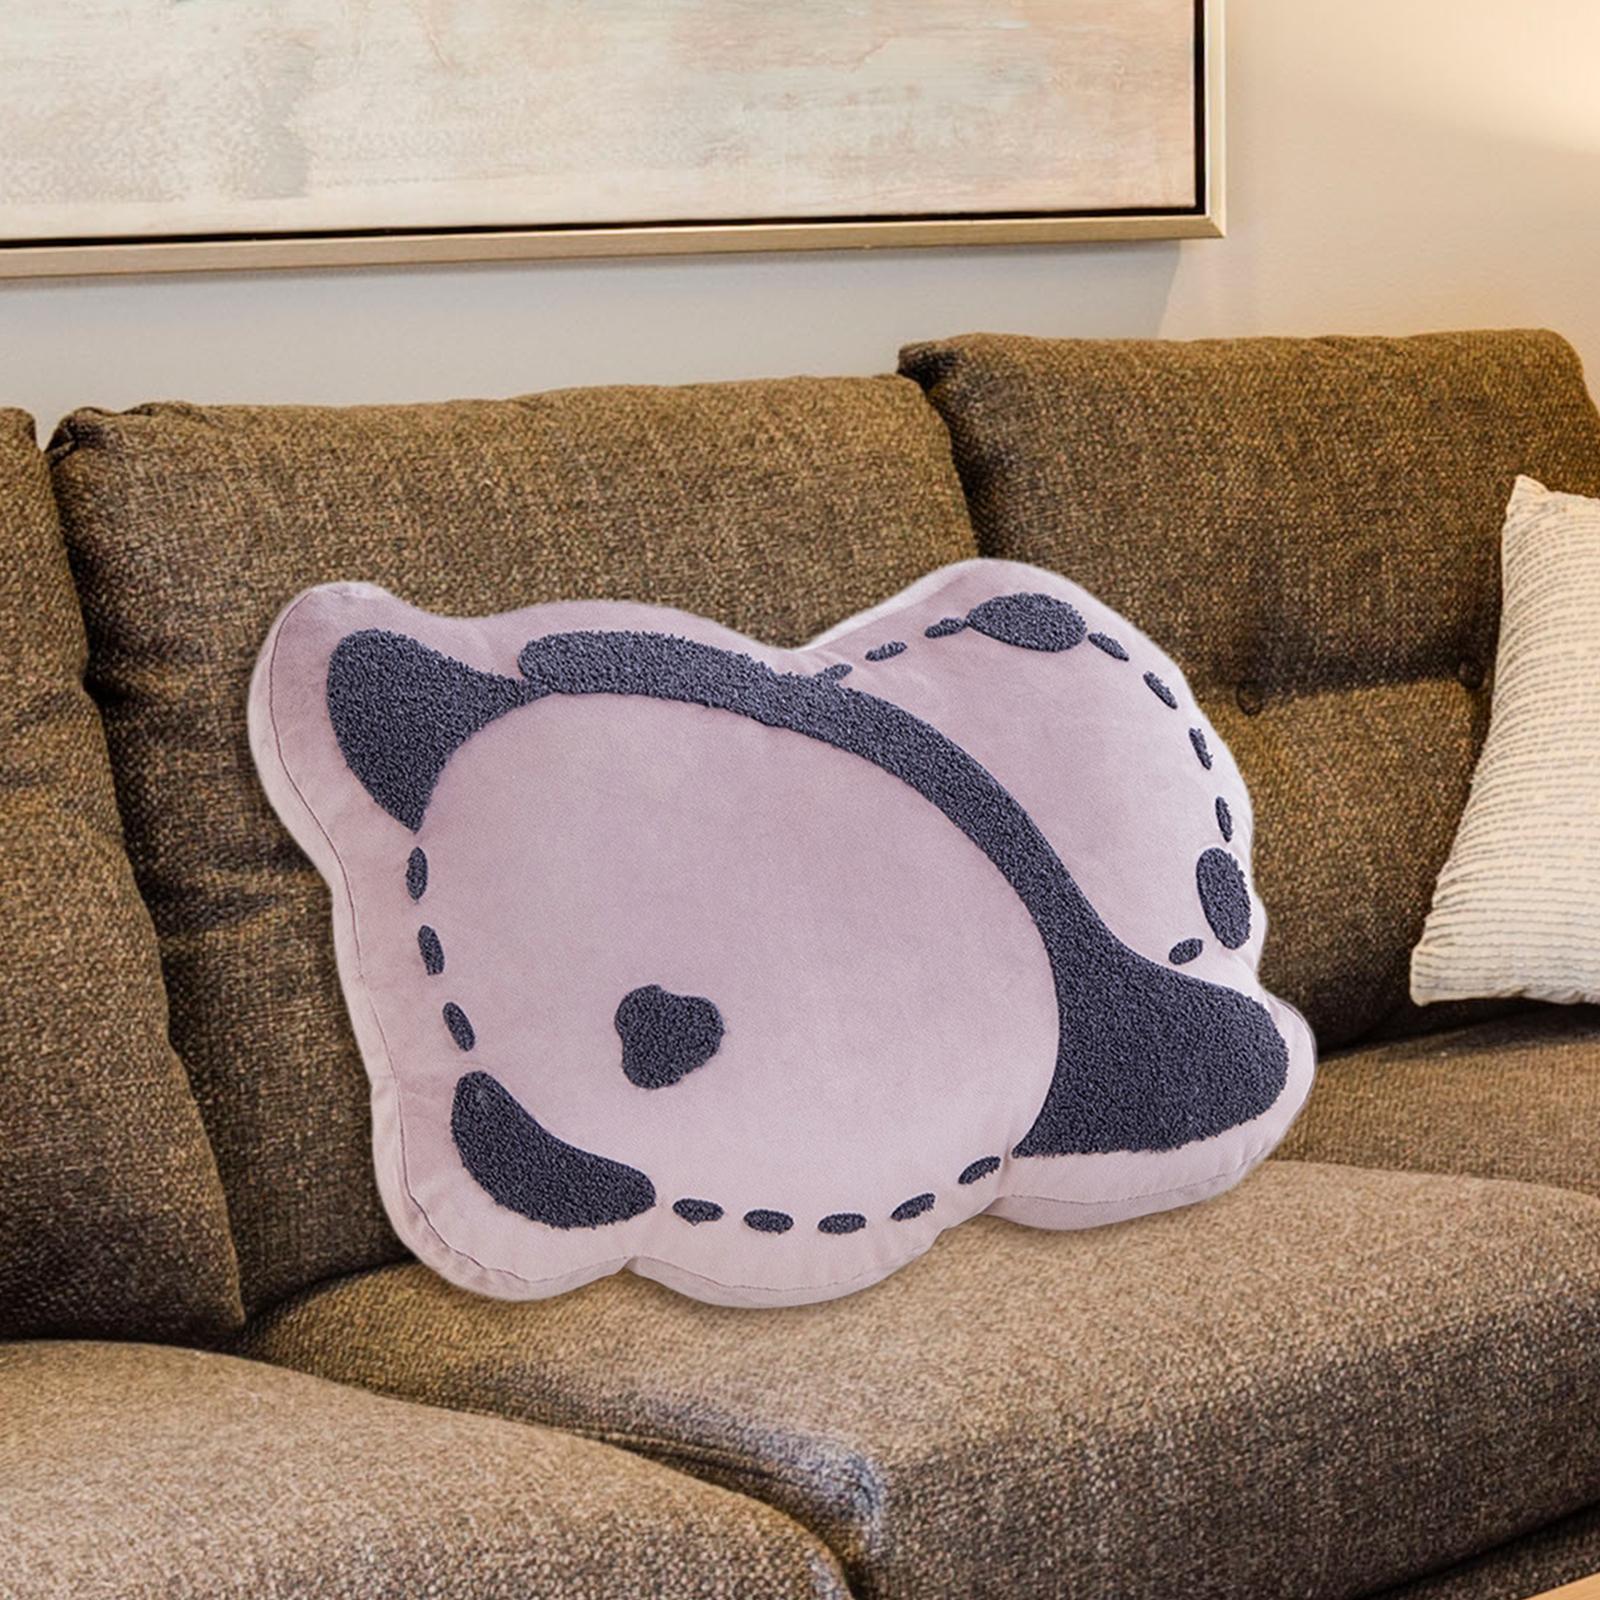 Panda Plush Pillow Soft Gifts Cute Plush Toy for Adults Gaming Bedroom Purple